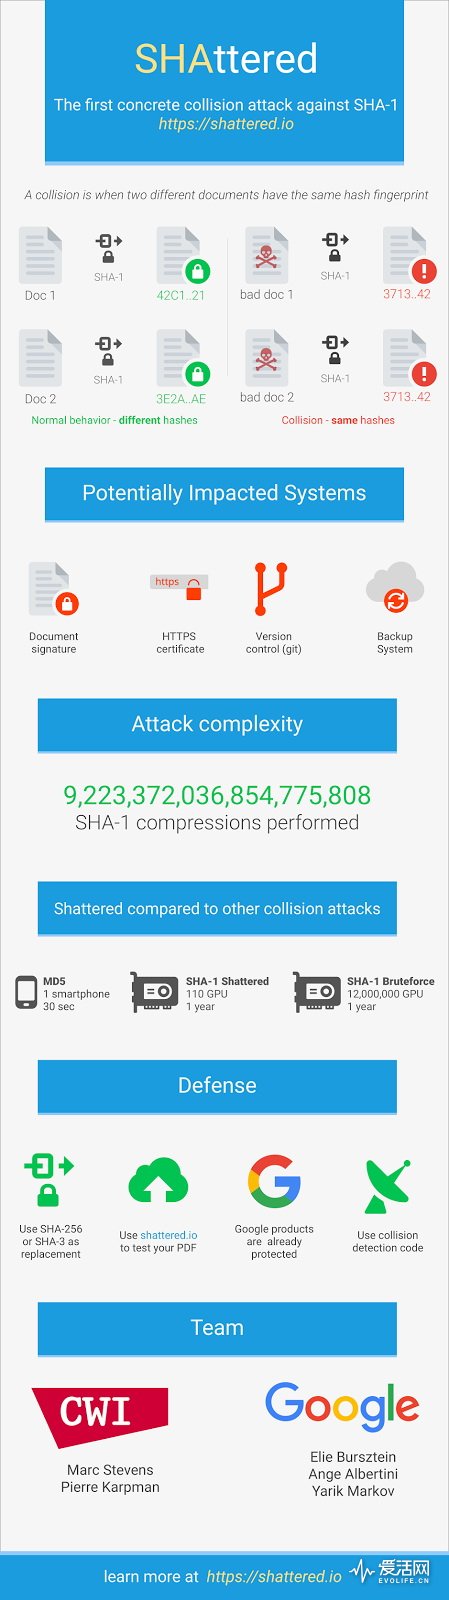 shattered-infographic